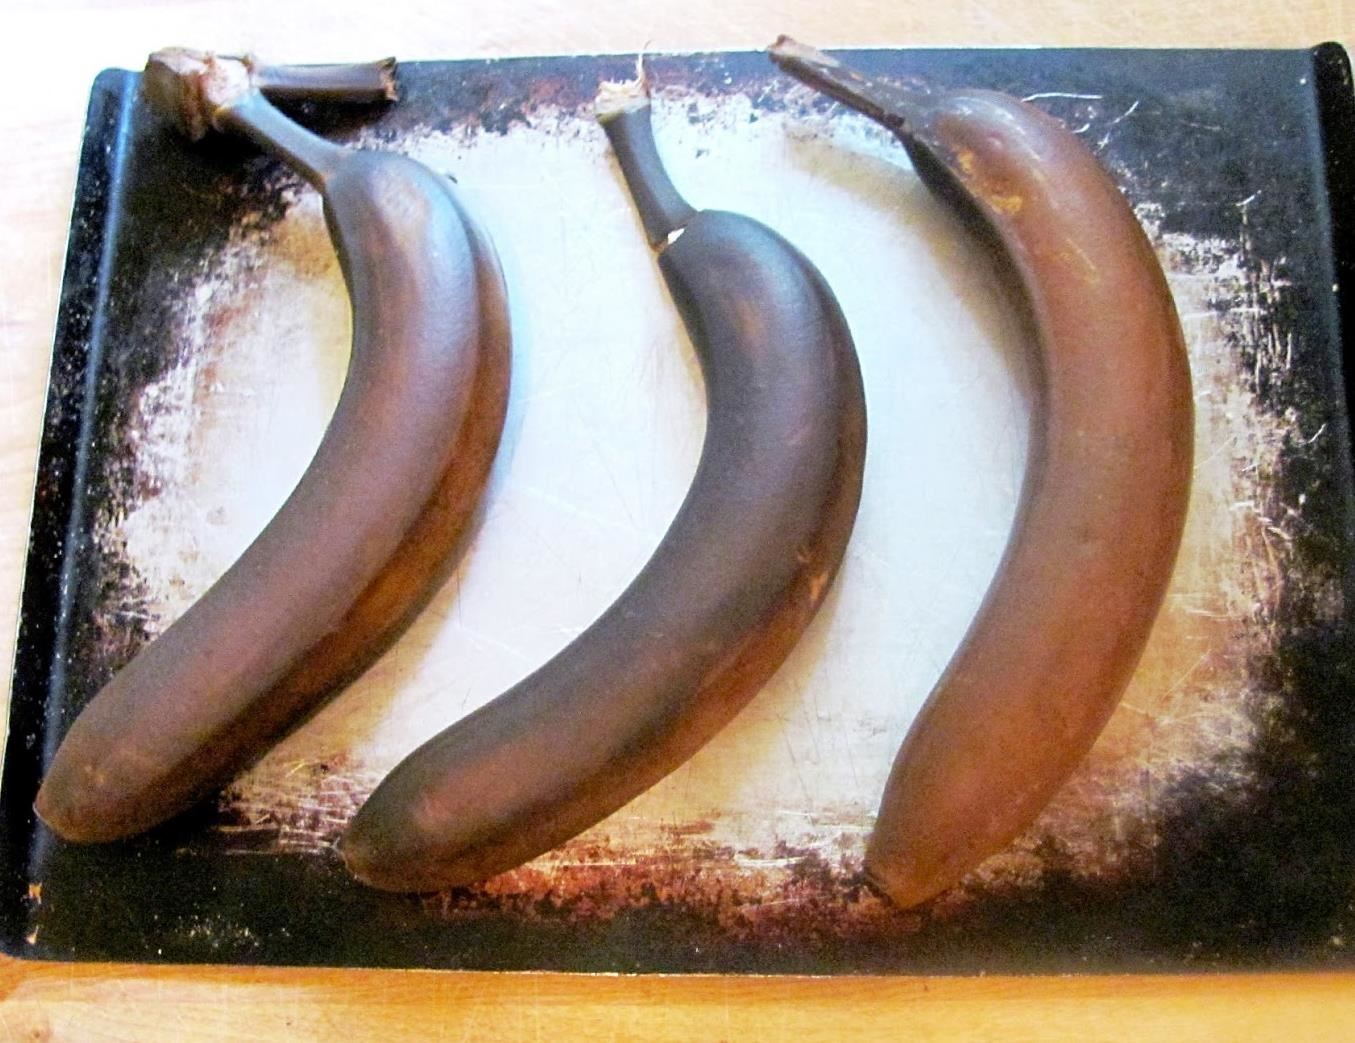 Ripen Bananas Faster with These 3 Simple Tricks